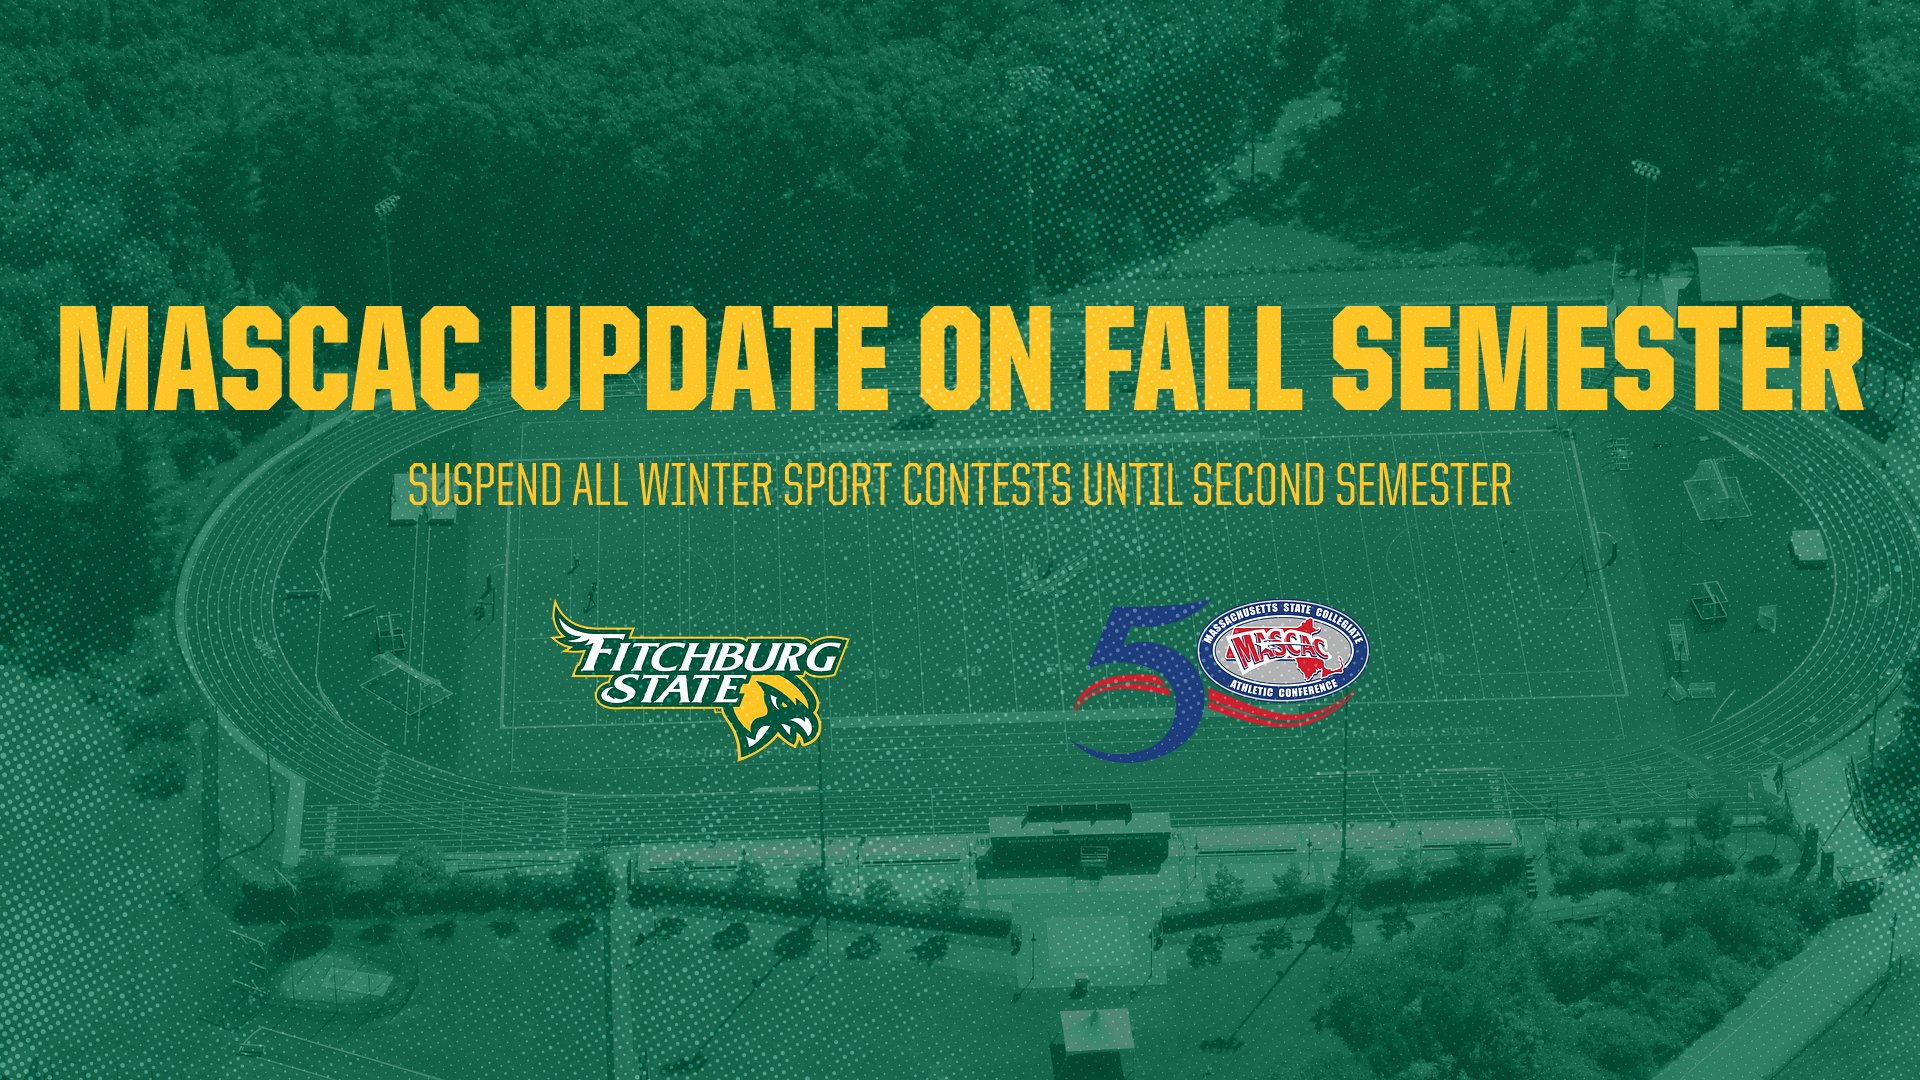 MASCAC Update on Fall Semester Competition